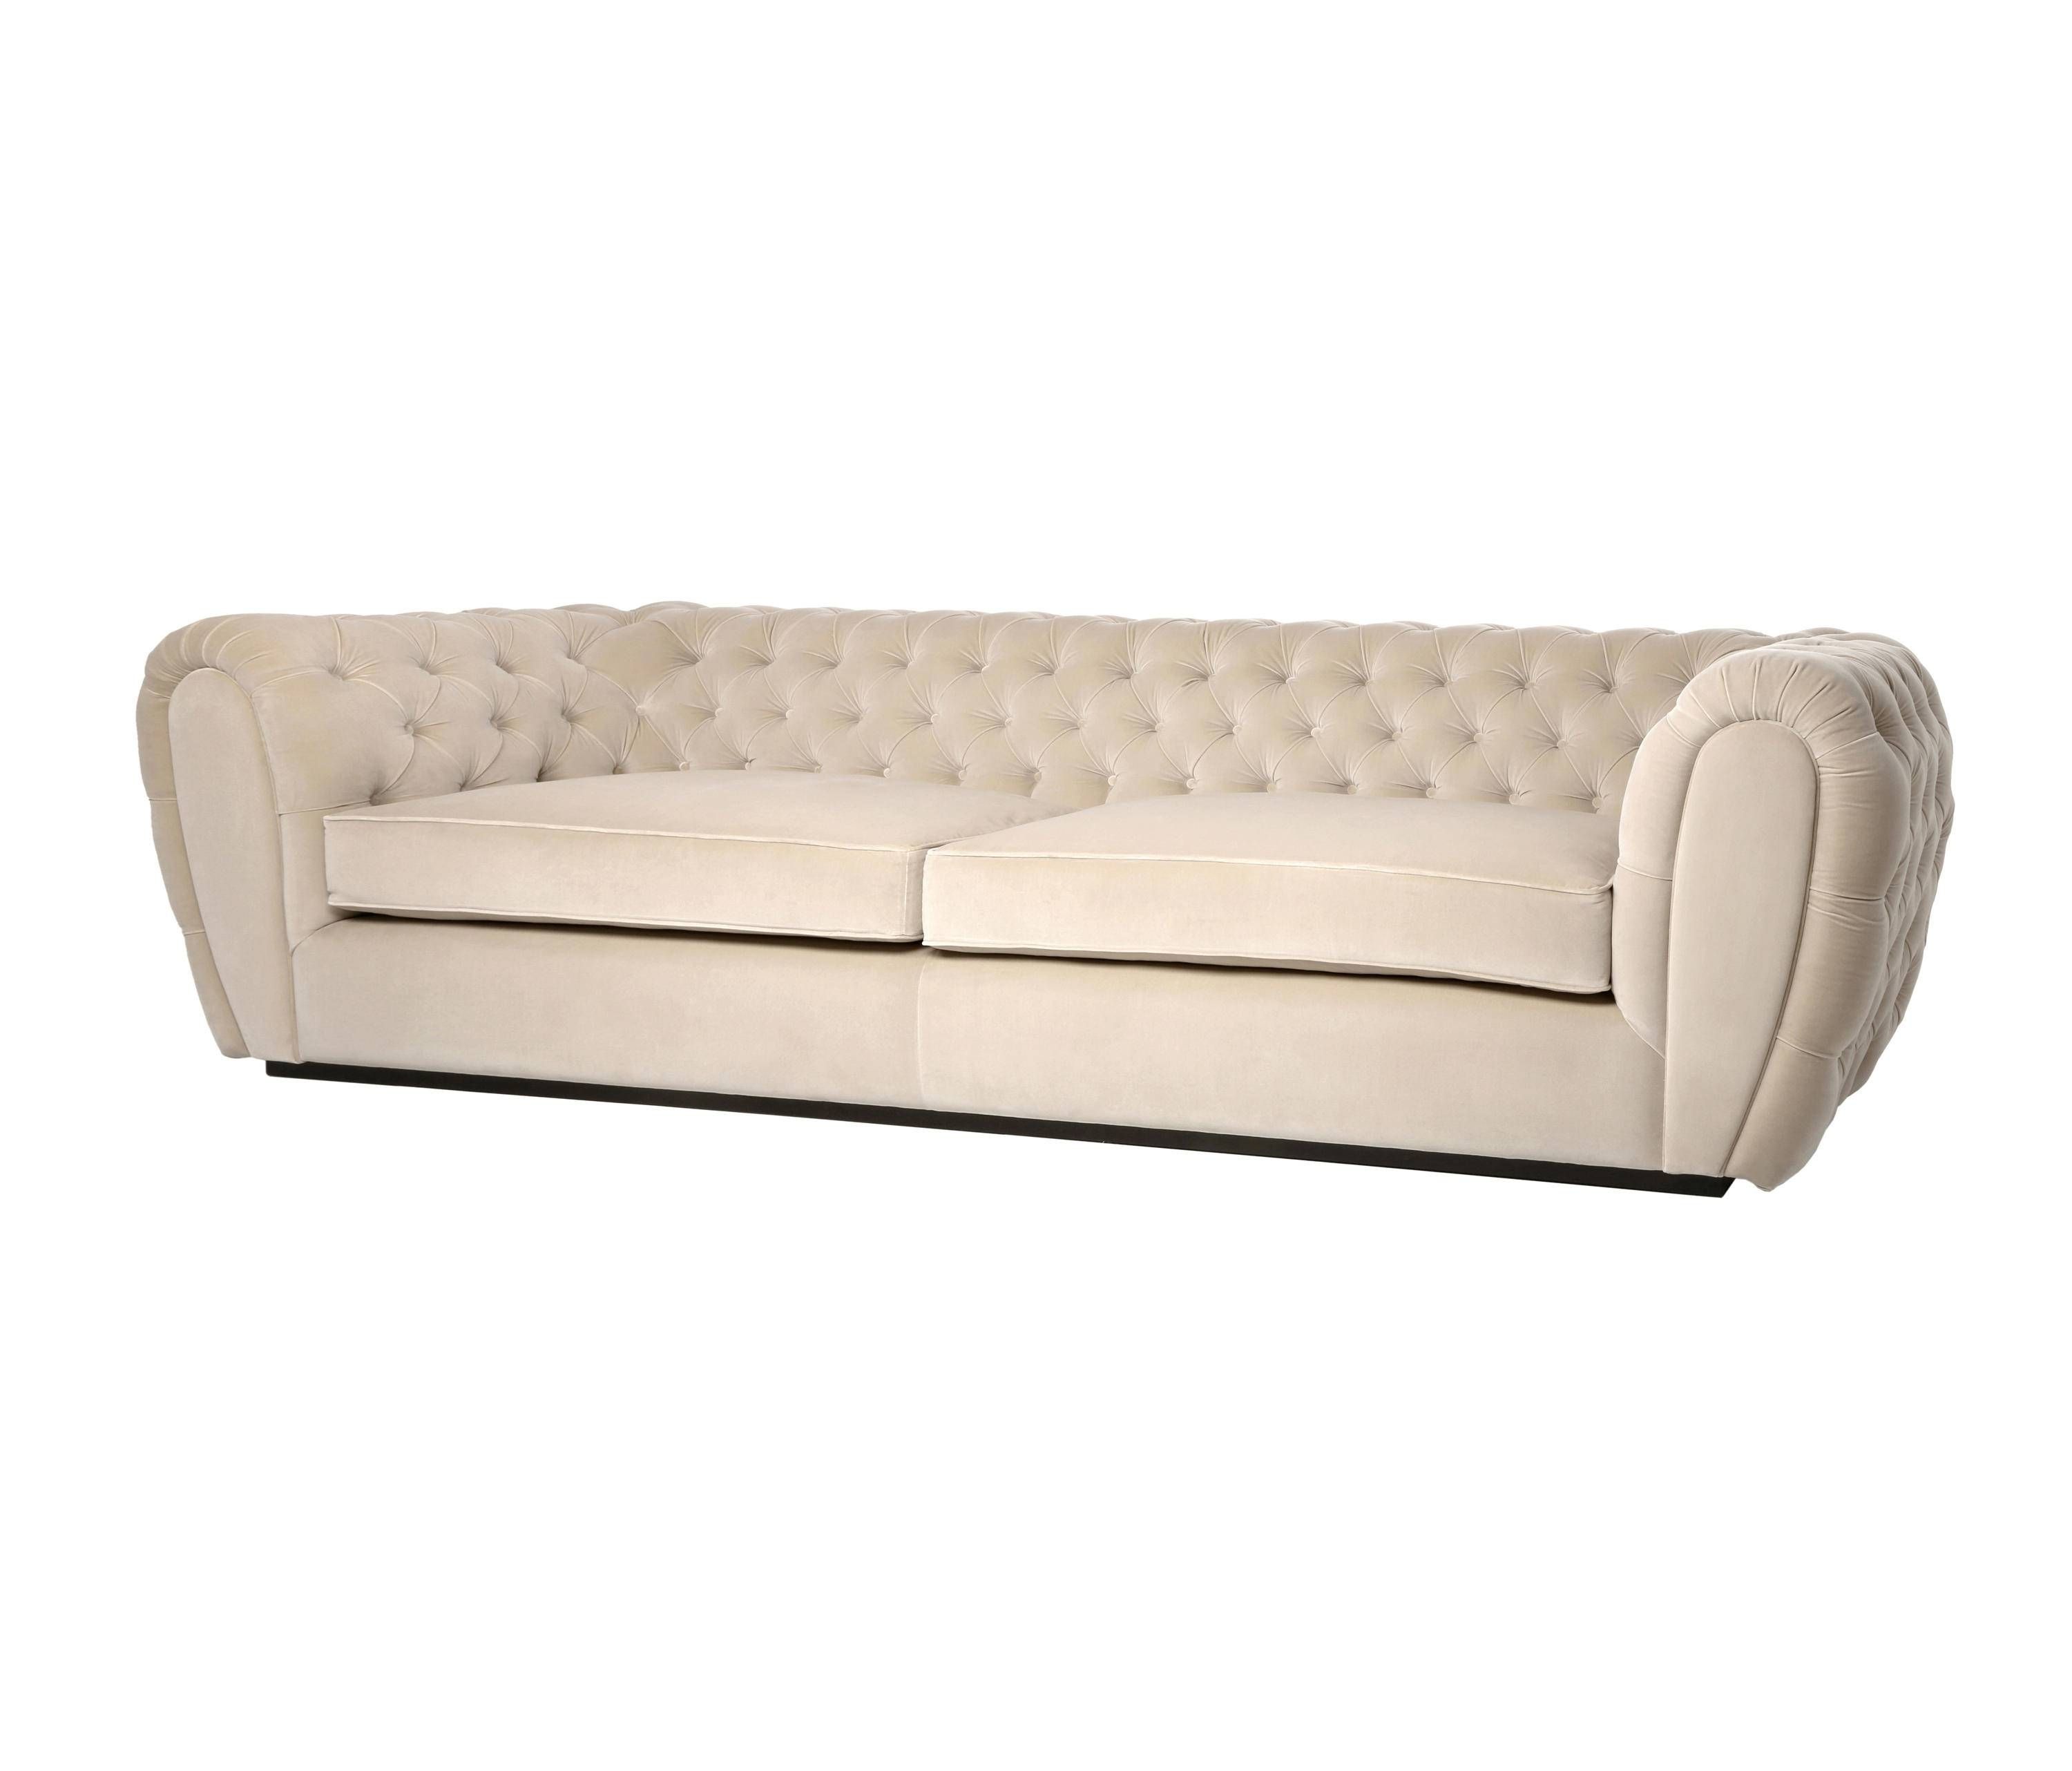 Windsor Sofa – Lounge Sofas From The Sofa & Chair Company Ltd For Windsor Sofas (View 11 of 30)